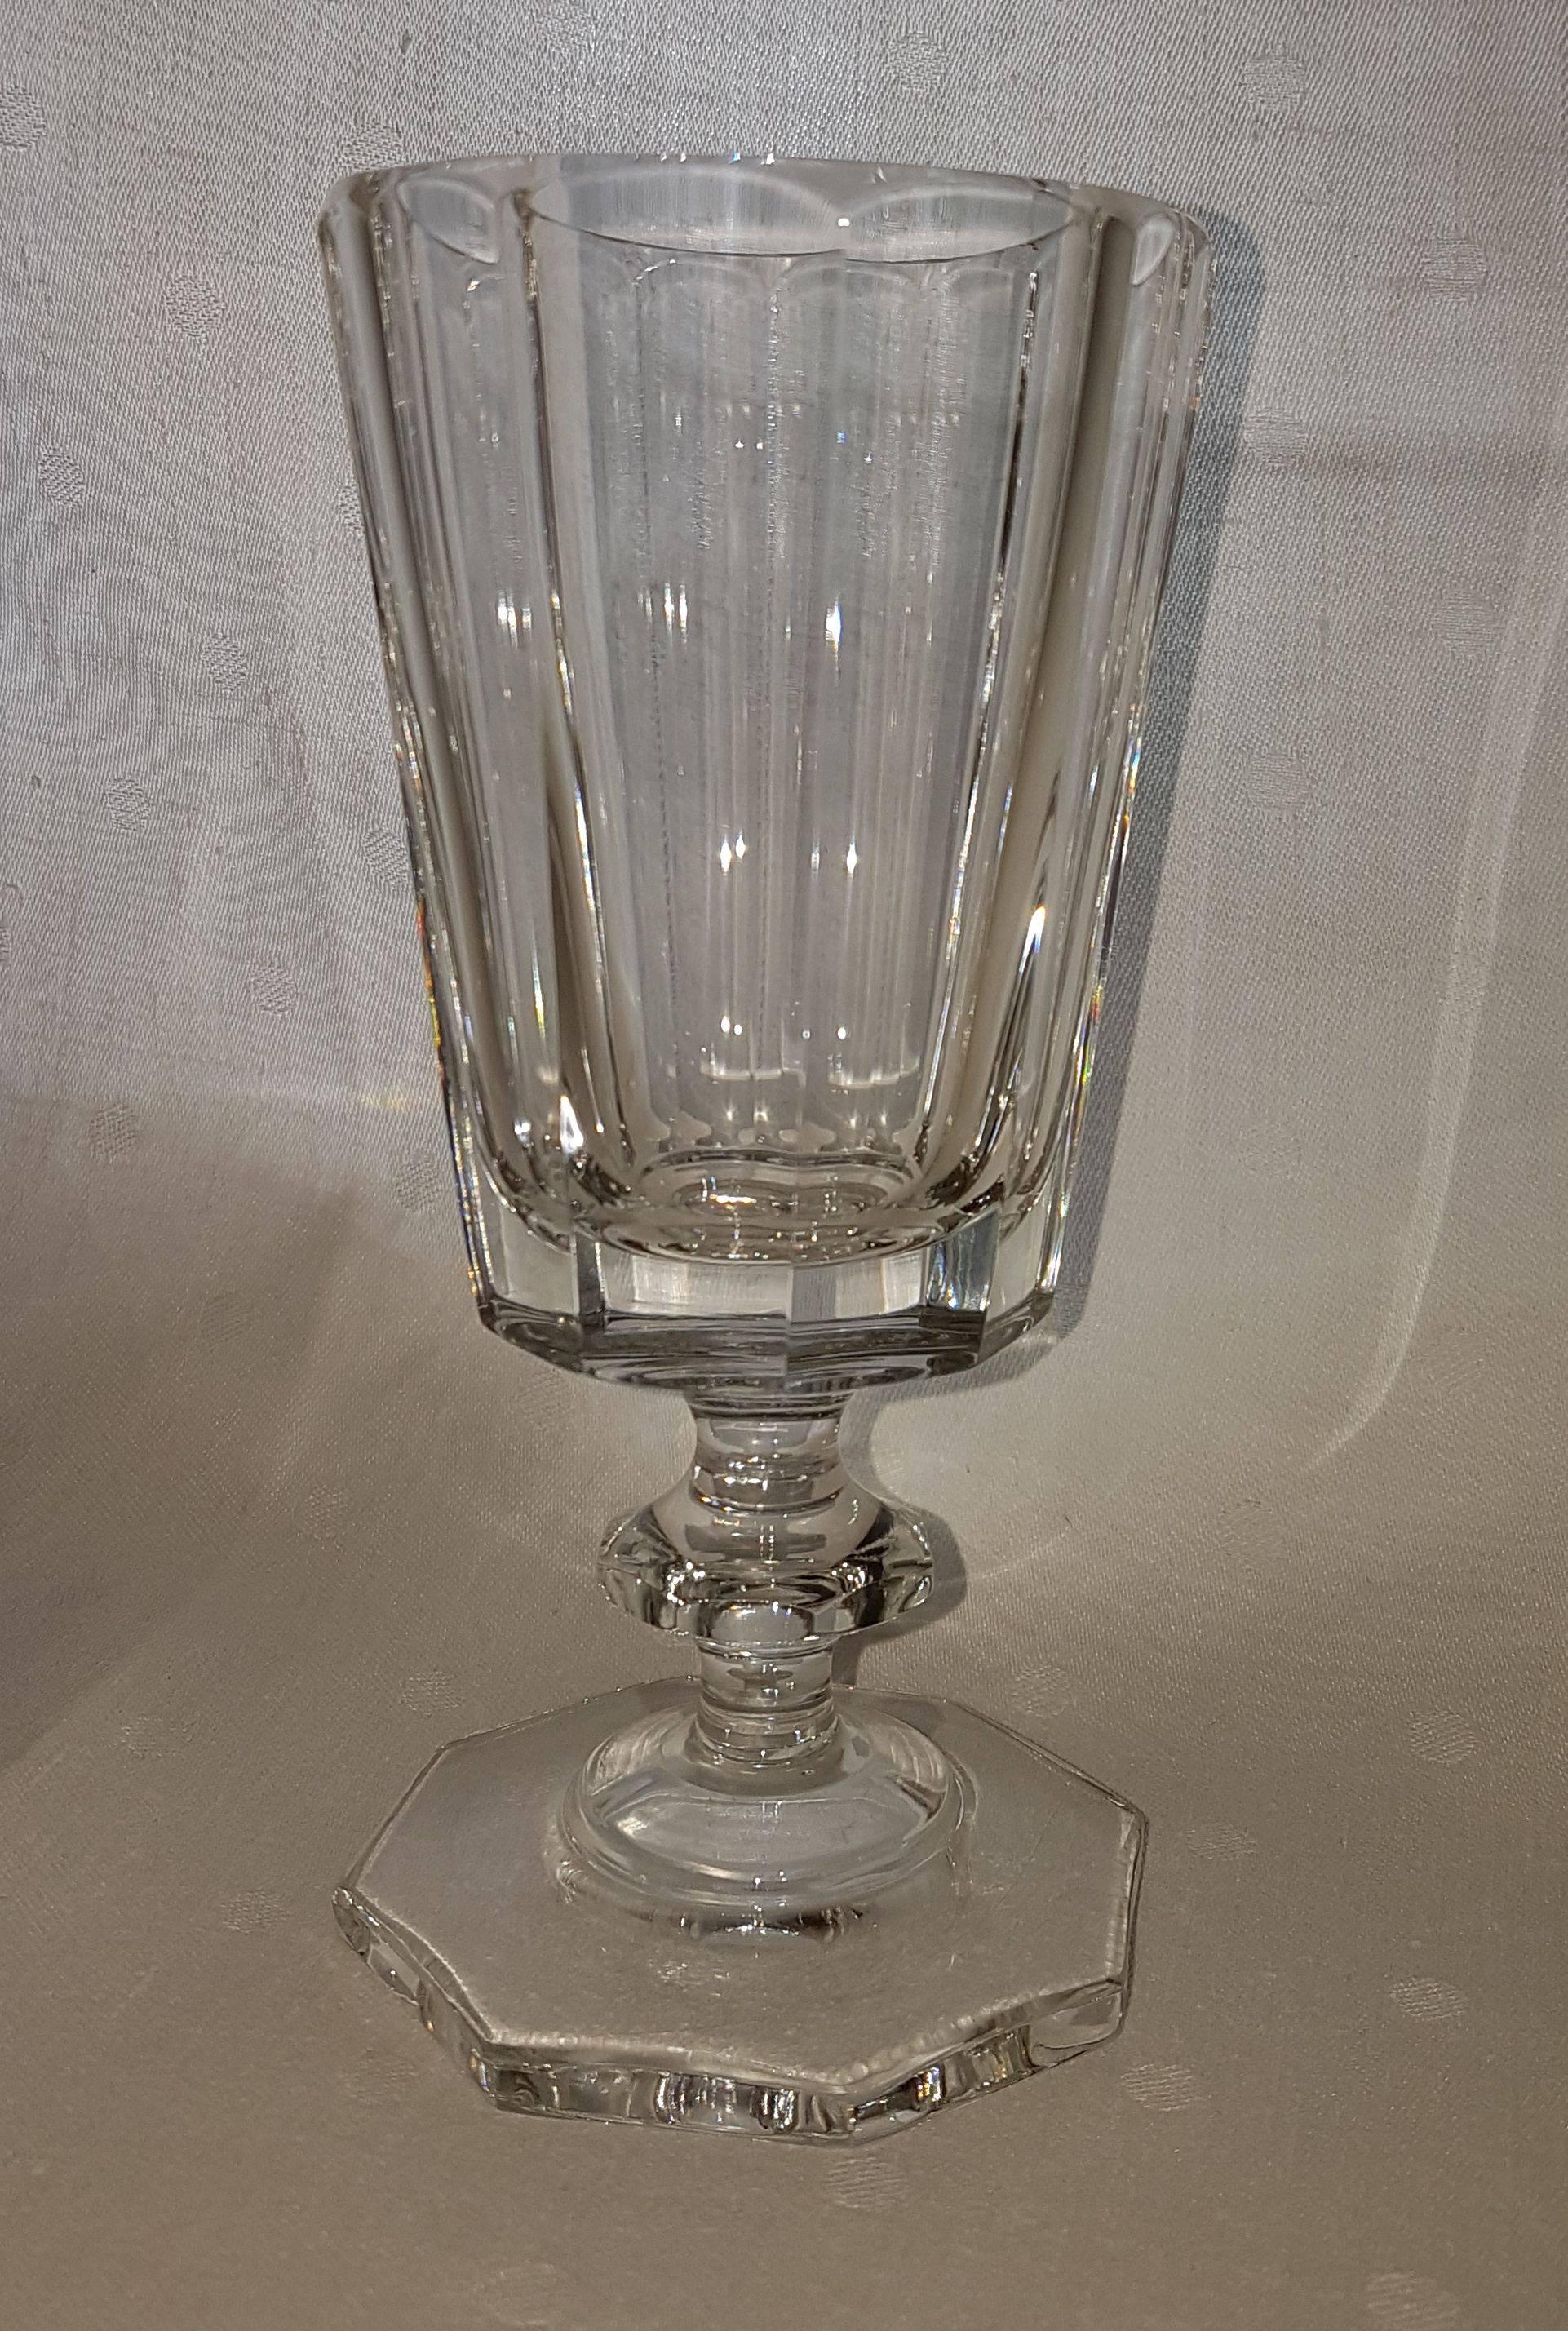 Mouth blown hand-cut crystal glass goblets made in Germany: solid, noble, elegant.
The “Biedermeier” inspired style, with bevelled body, base and stem pearl,
gives them a timeless beauty.
Rounded off edges for more comfortable drinking.
A